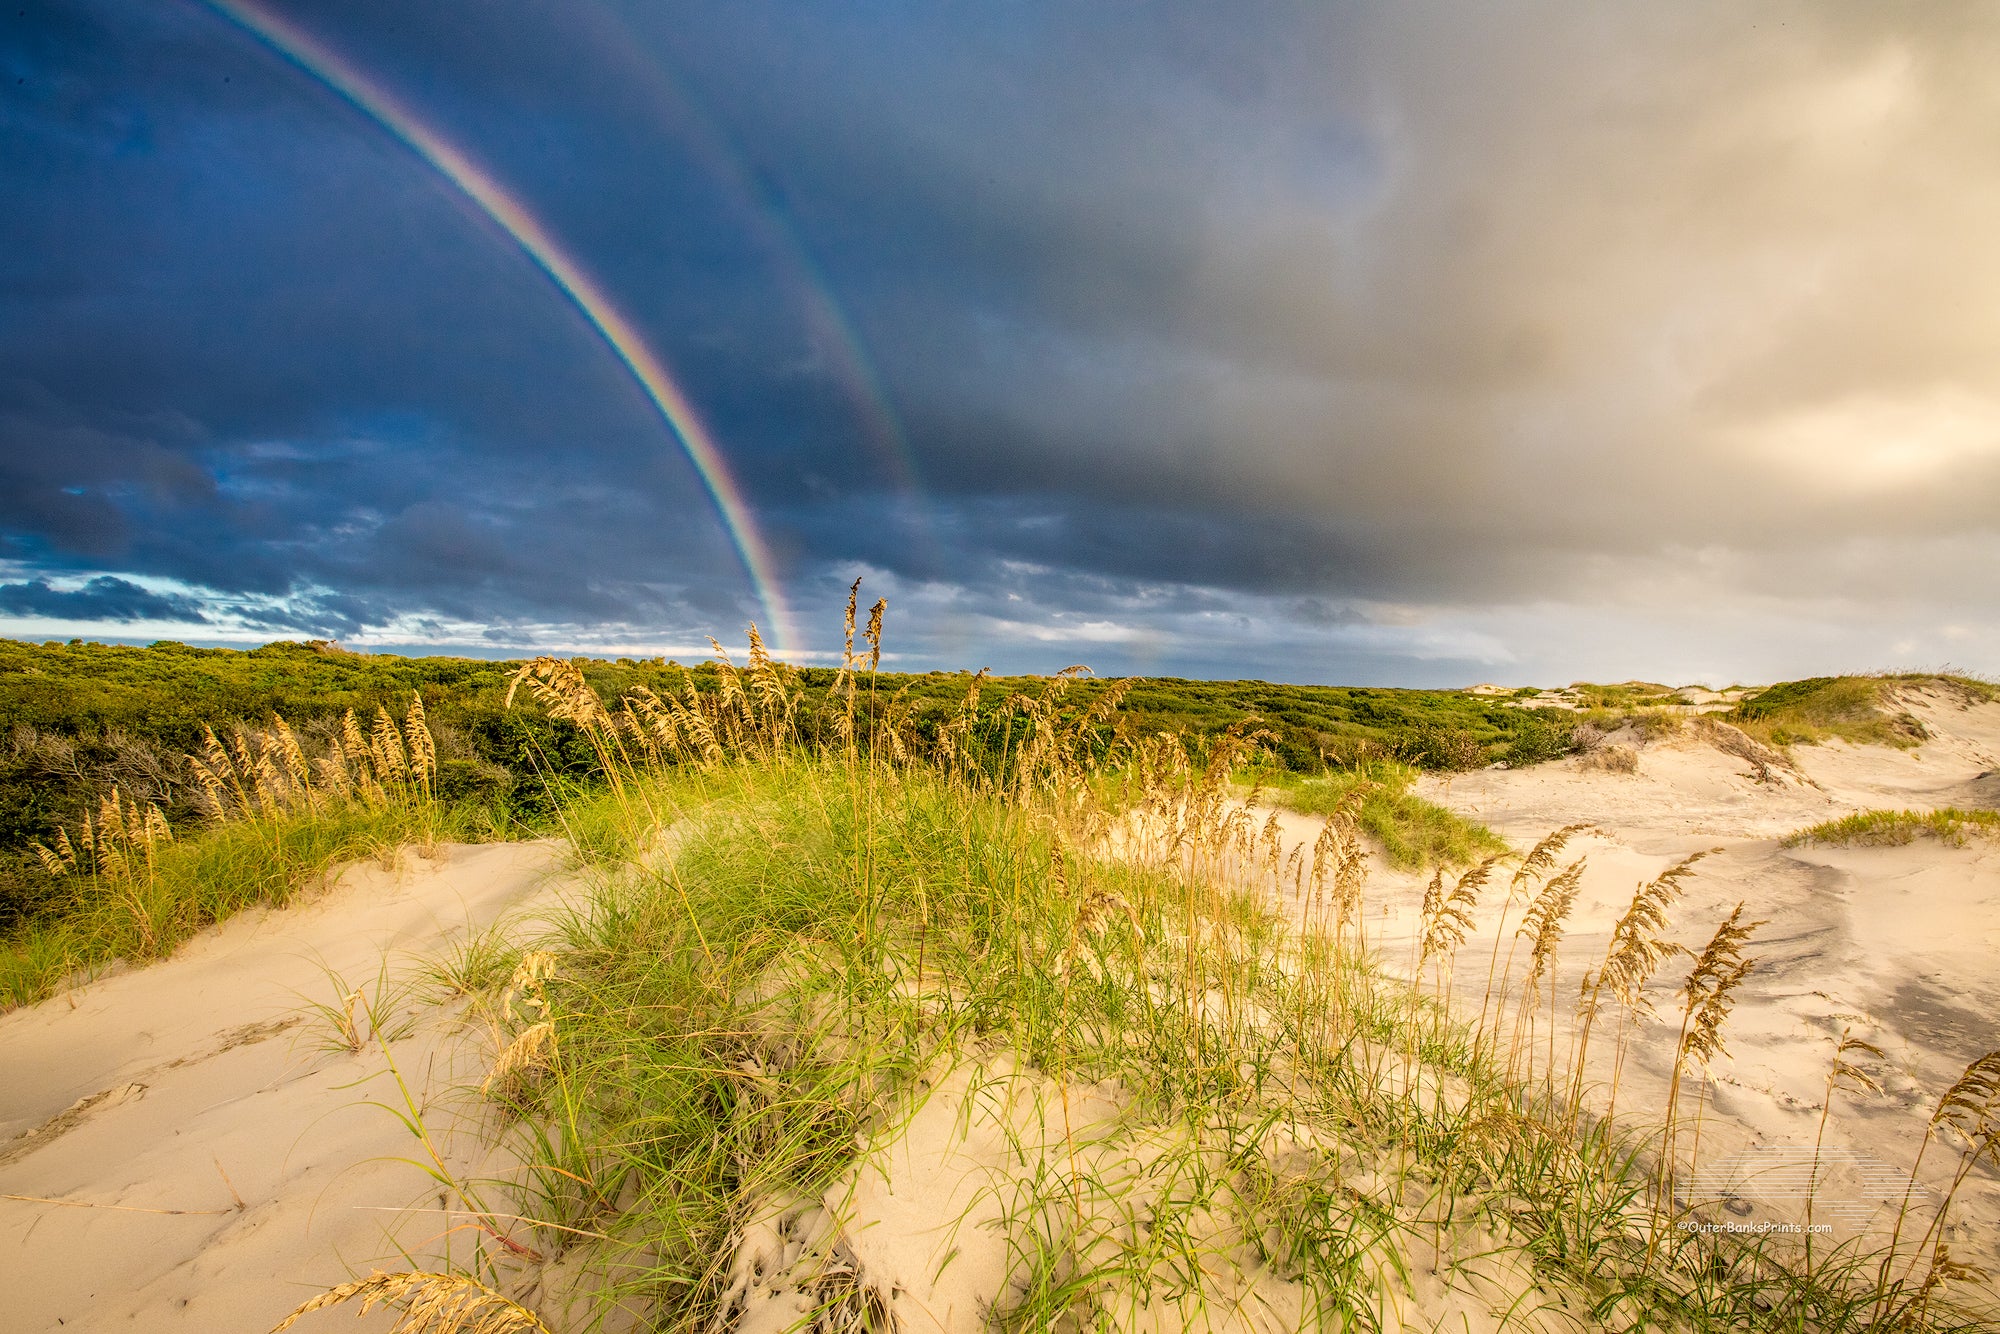 Outer Bank sand dunes and double rainbow in Corolla North Carolina.